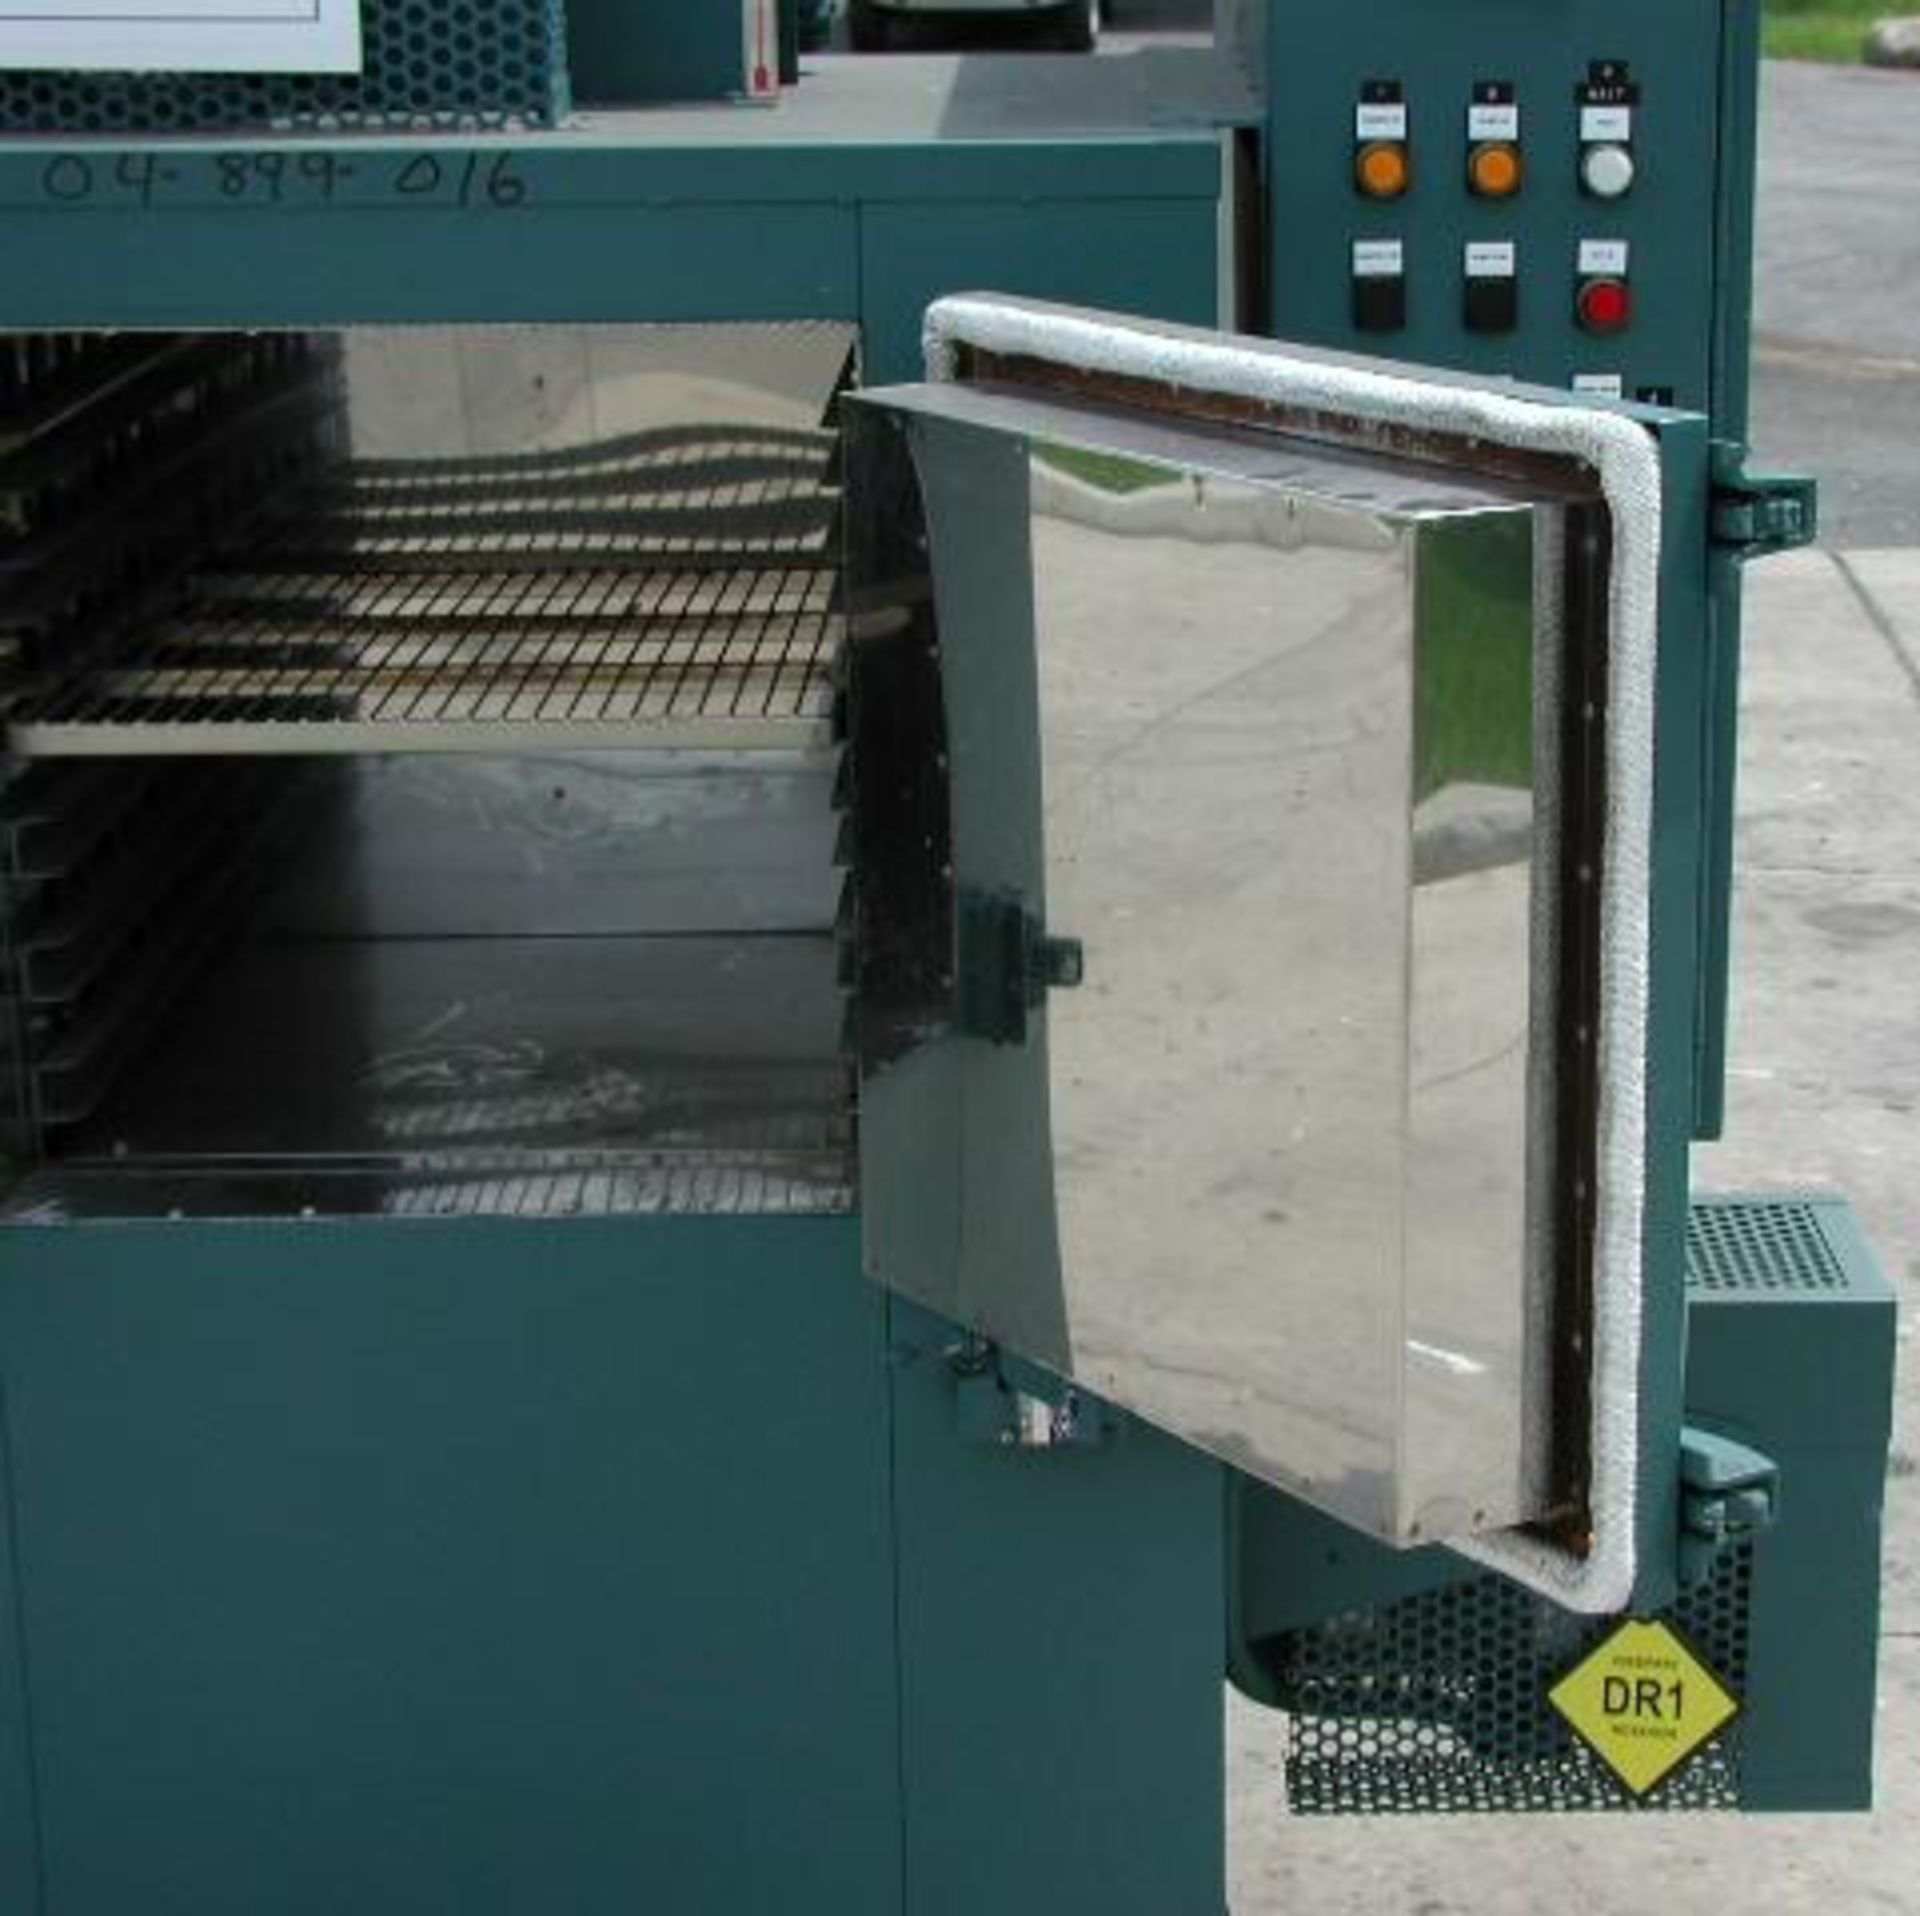 CABINET OVEN, GRIEVE, 20" w X 20" H X 20" l, 500 deg. F. max temp., gas fired, solvent rated, - Image 6 of 8